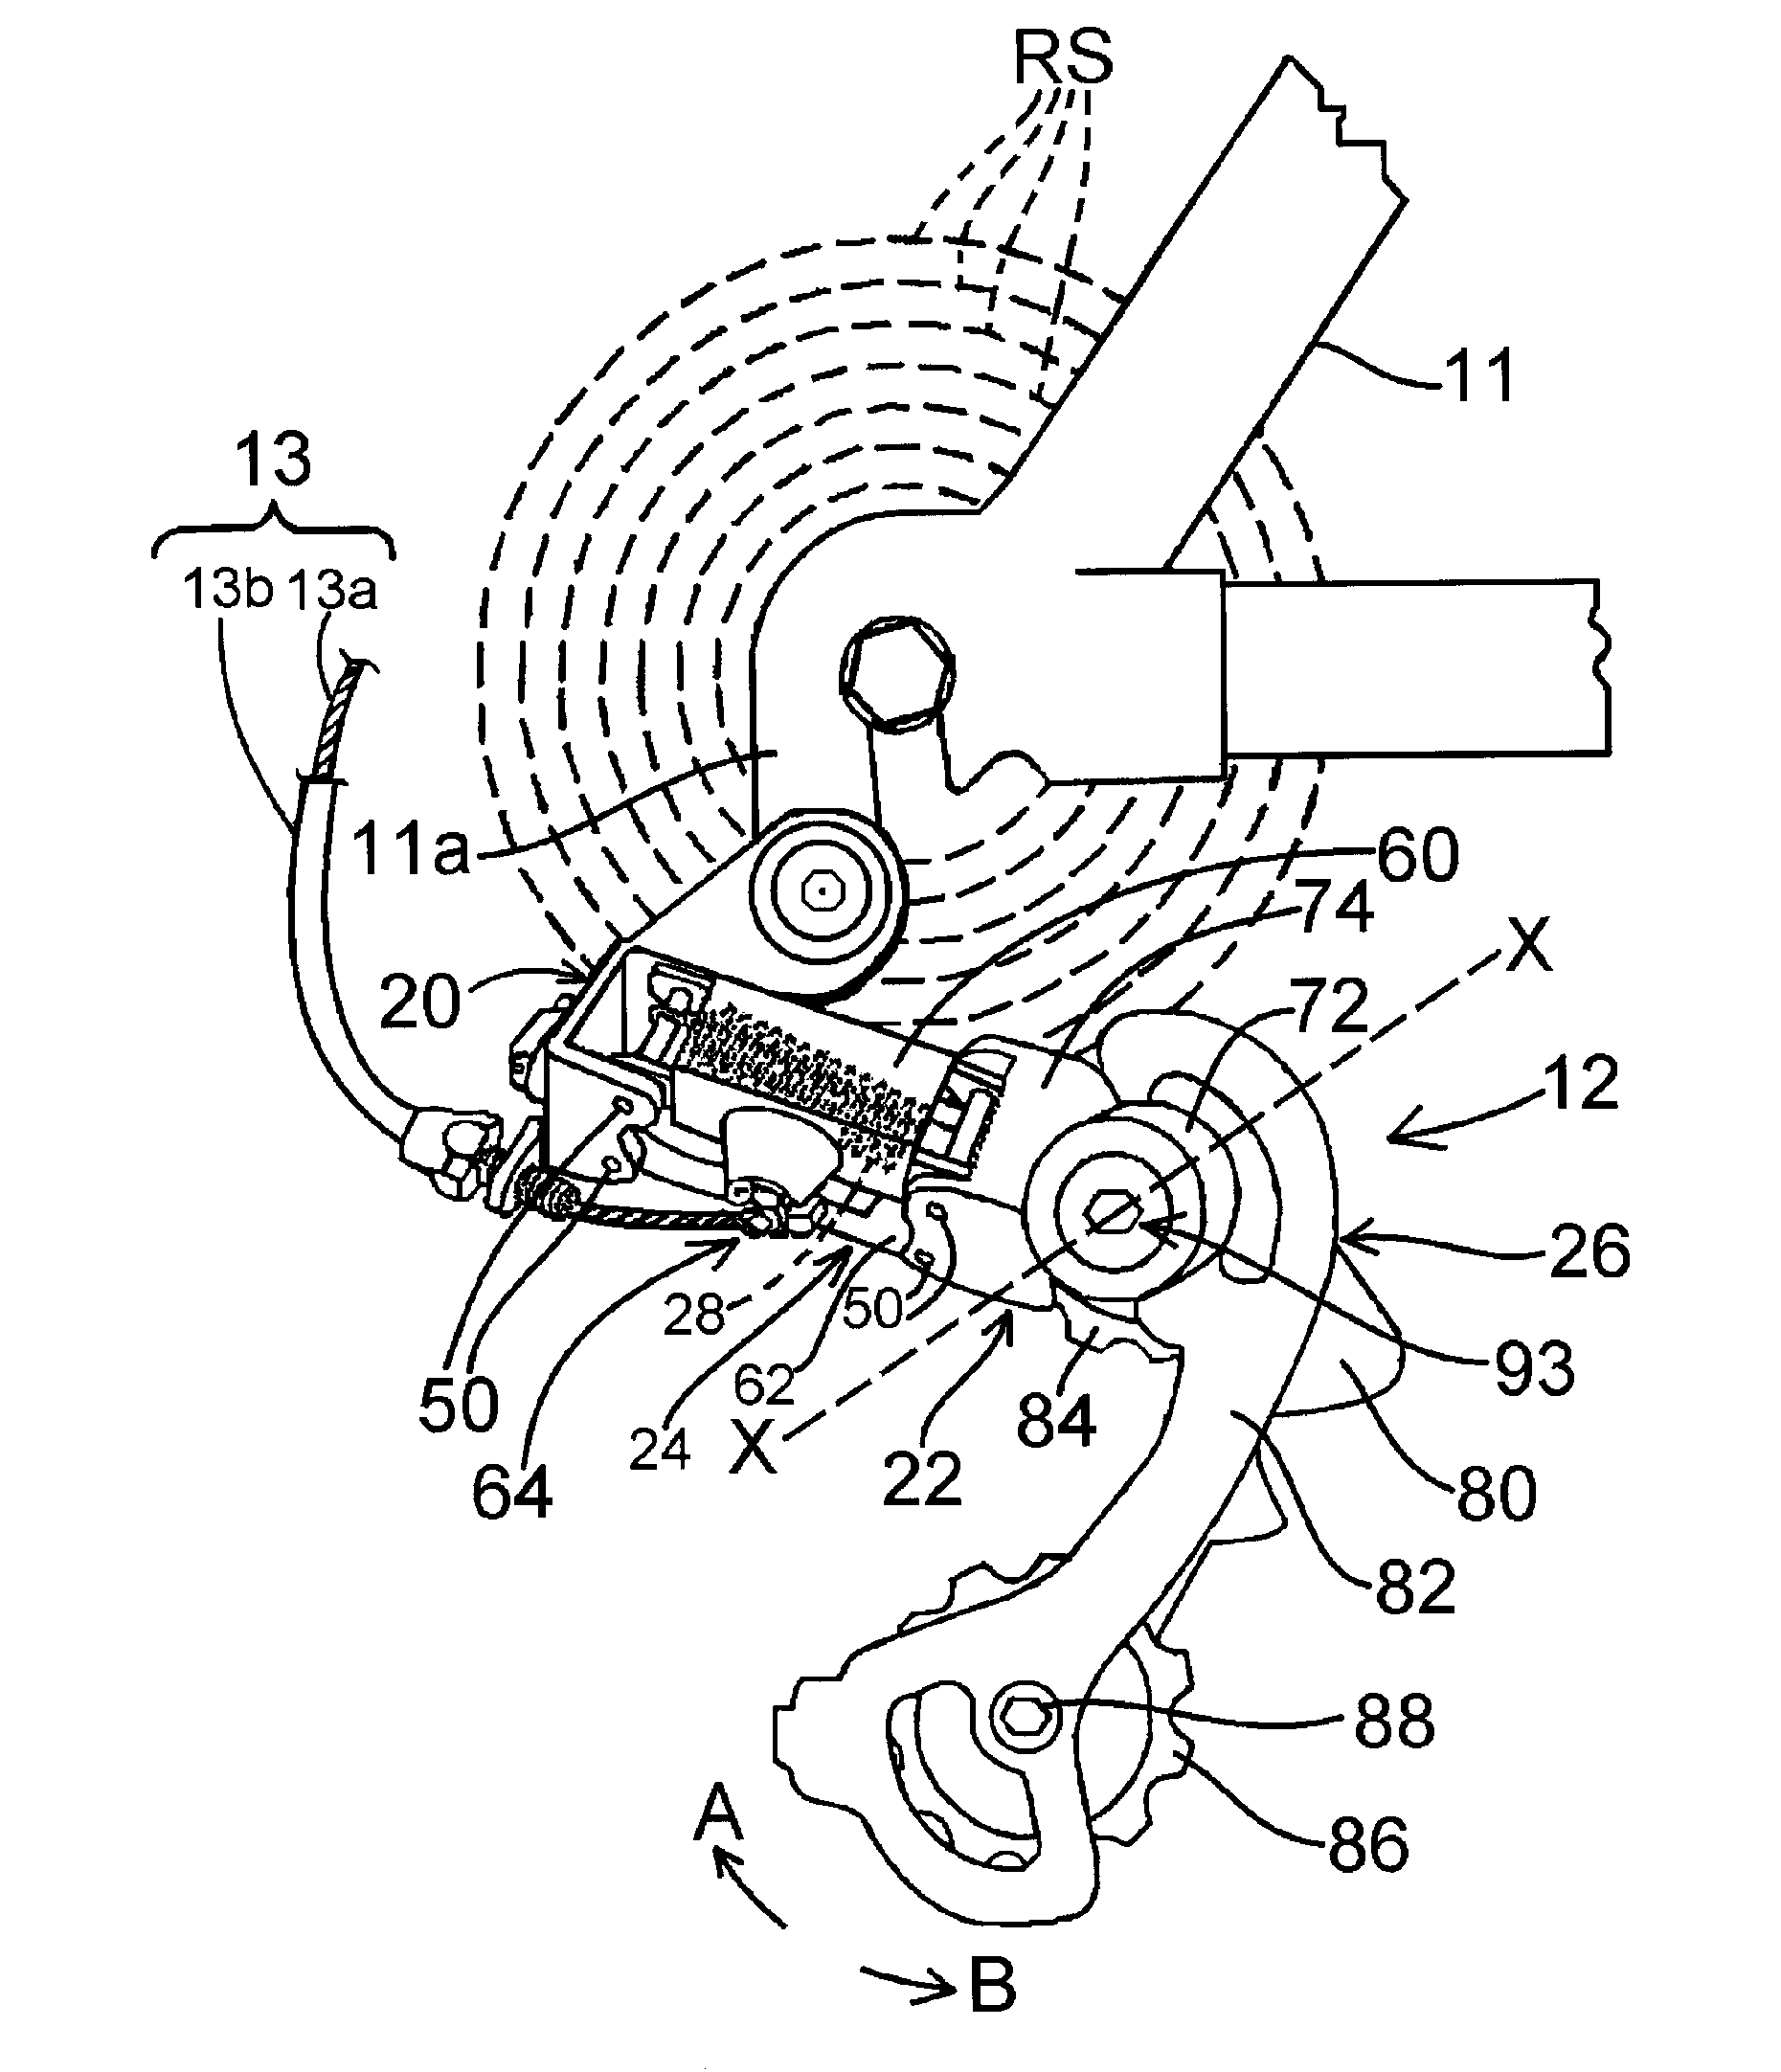 Bicycle rear derailleur with a motion resisting structure